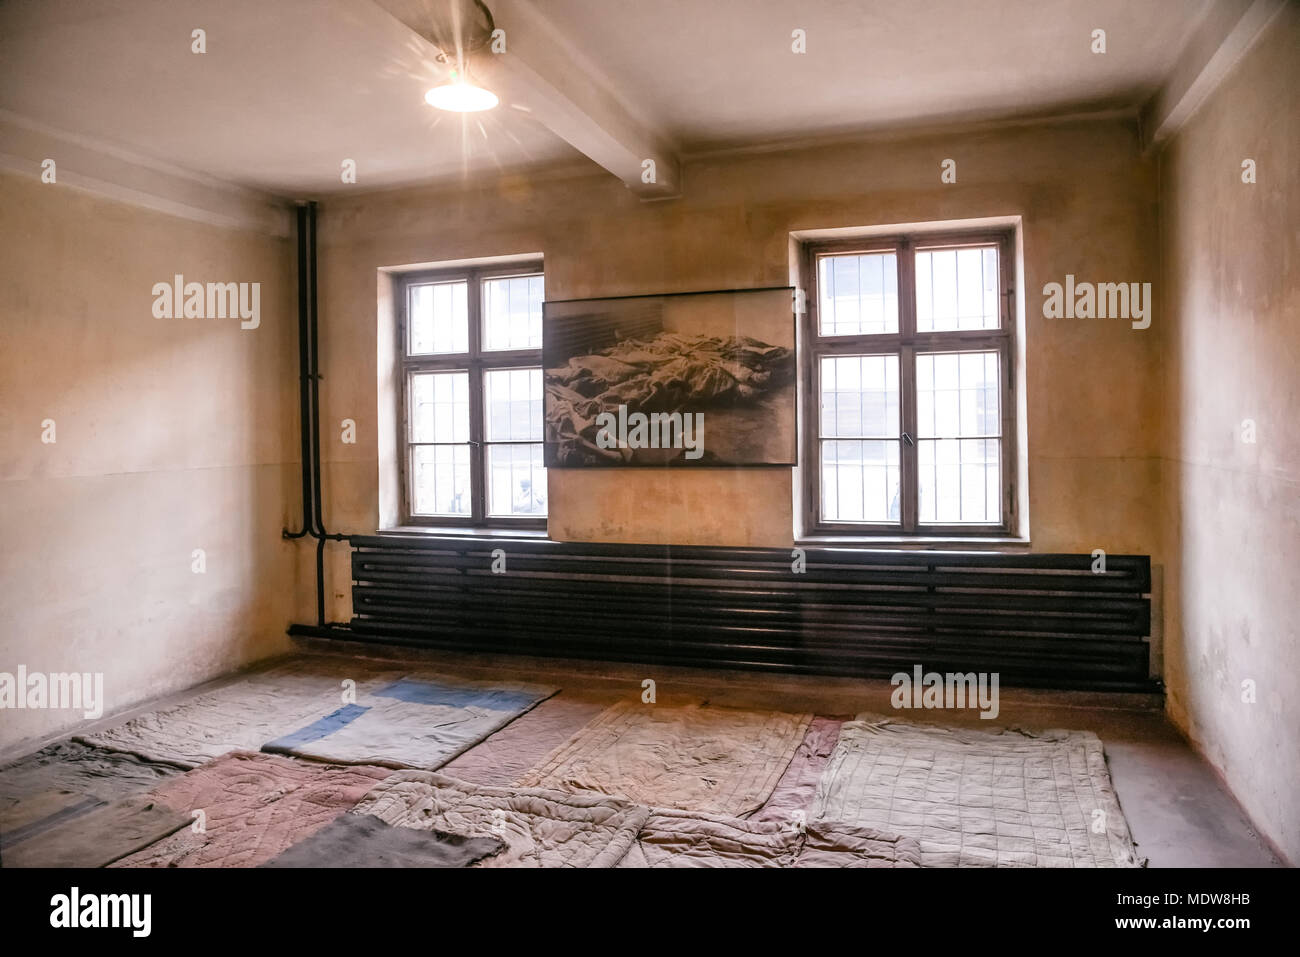 Oswiecim / Poland - 02.15.2018: Prisoners room with only few blankets on the floor instead of beds in Auschwitz Concentration Camp Museum. Stock Photo